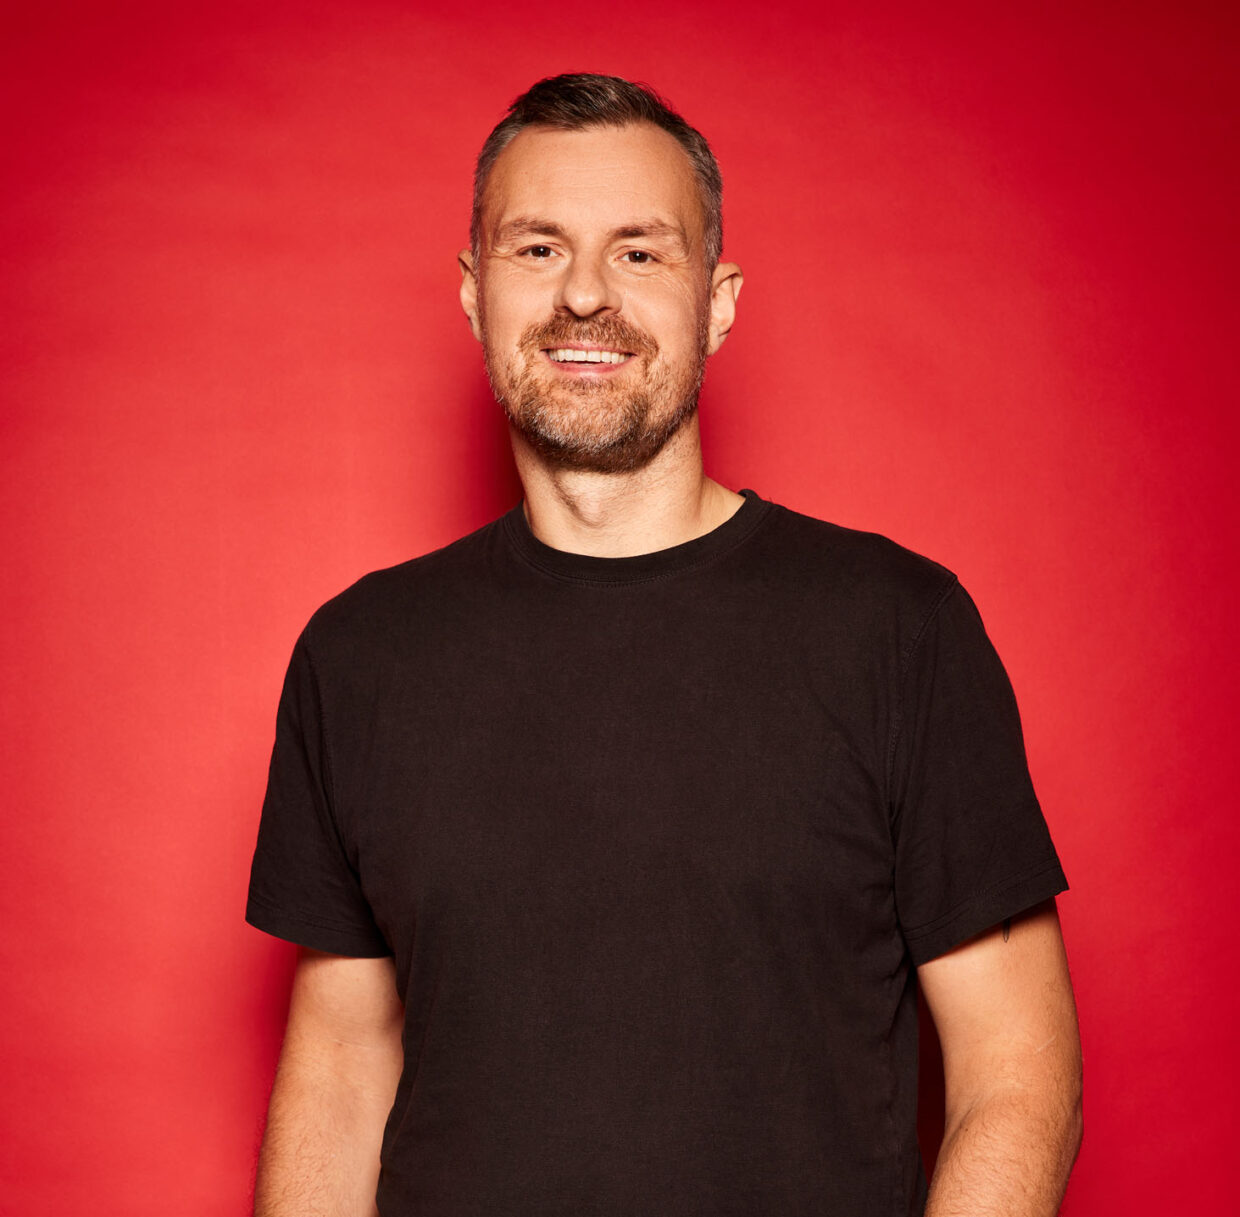 Man with short hair and a beard smiling at a camera. The man is wearing a black t-shirt and is standing against a red background